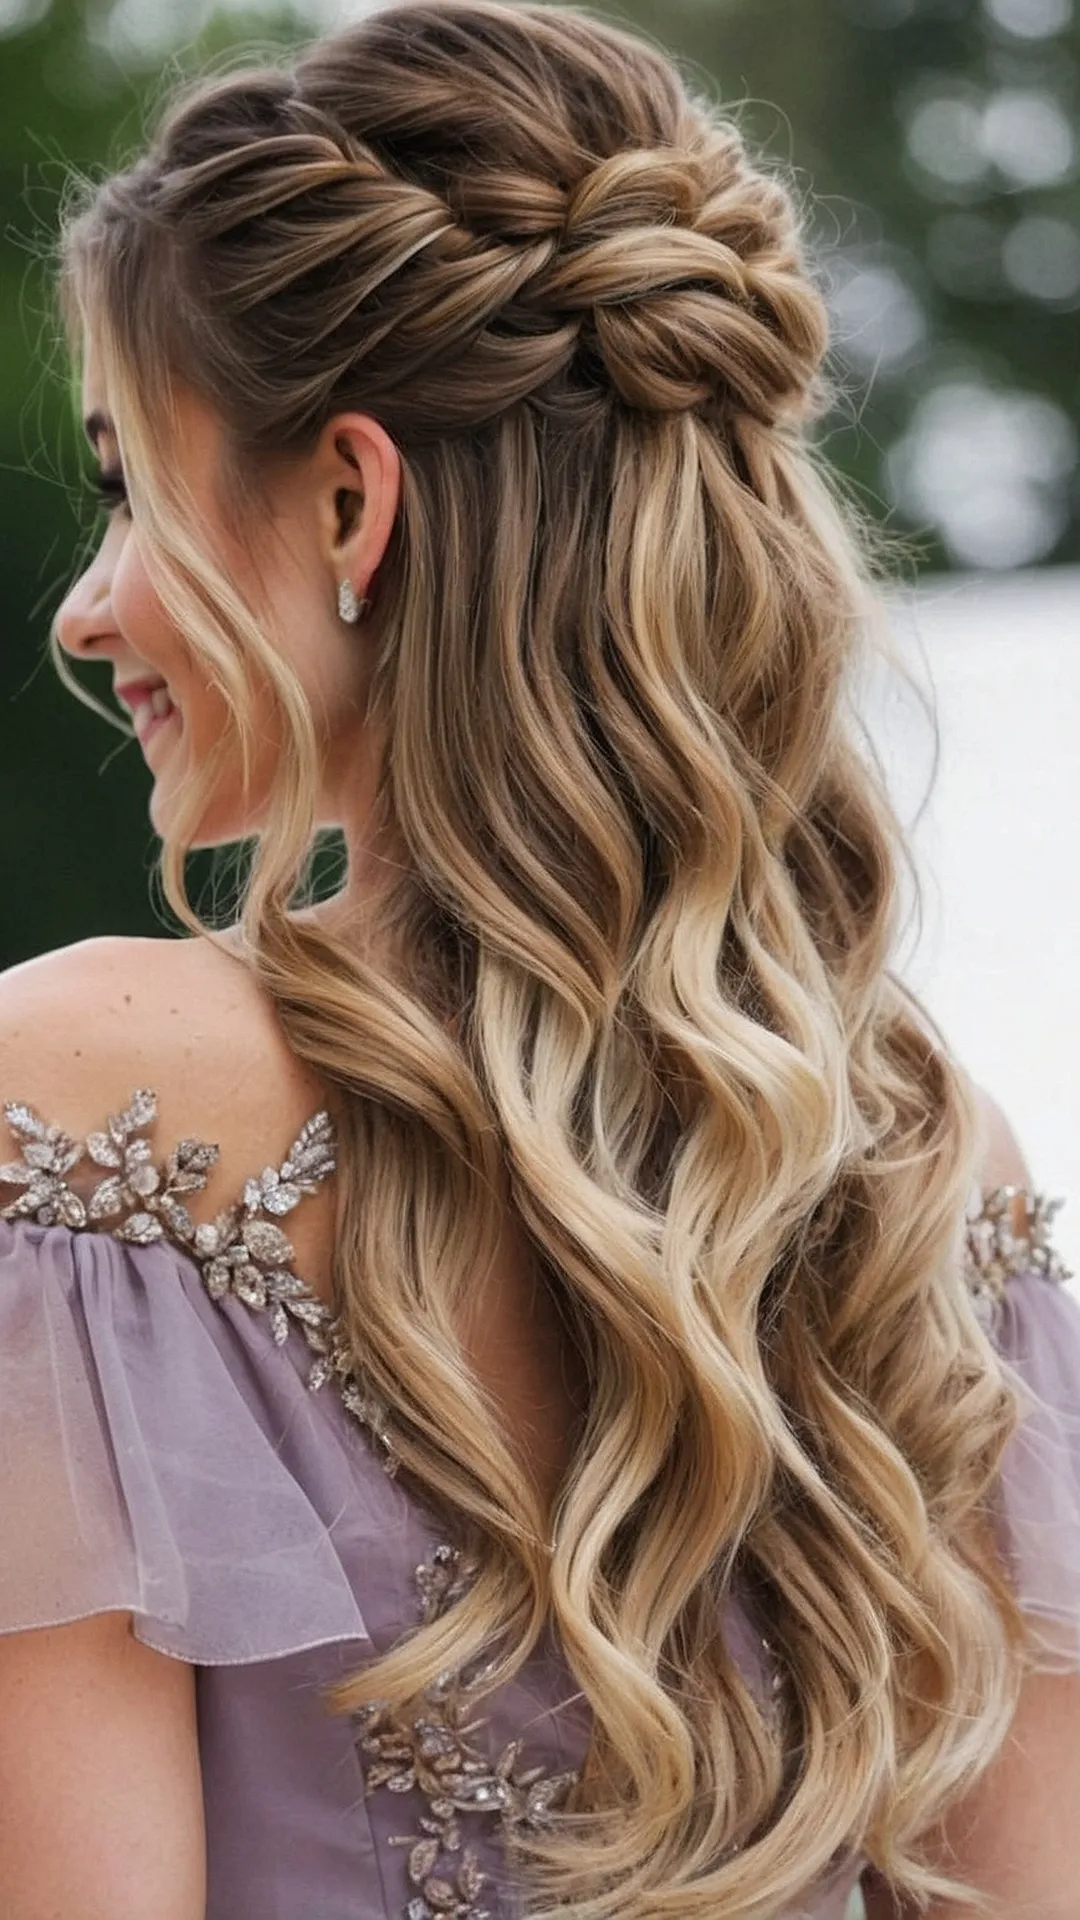 Romantic Curls: Dreamy Prom Hairstyle Ideas